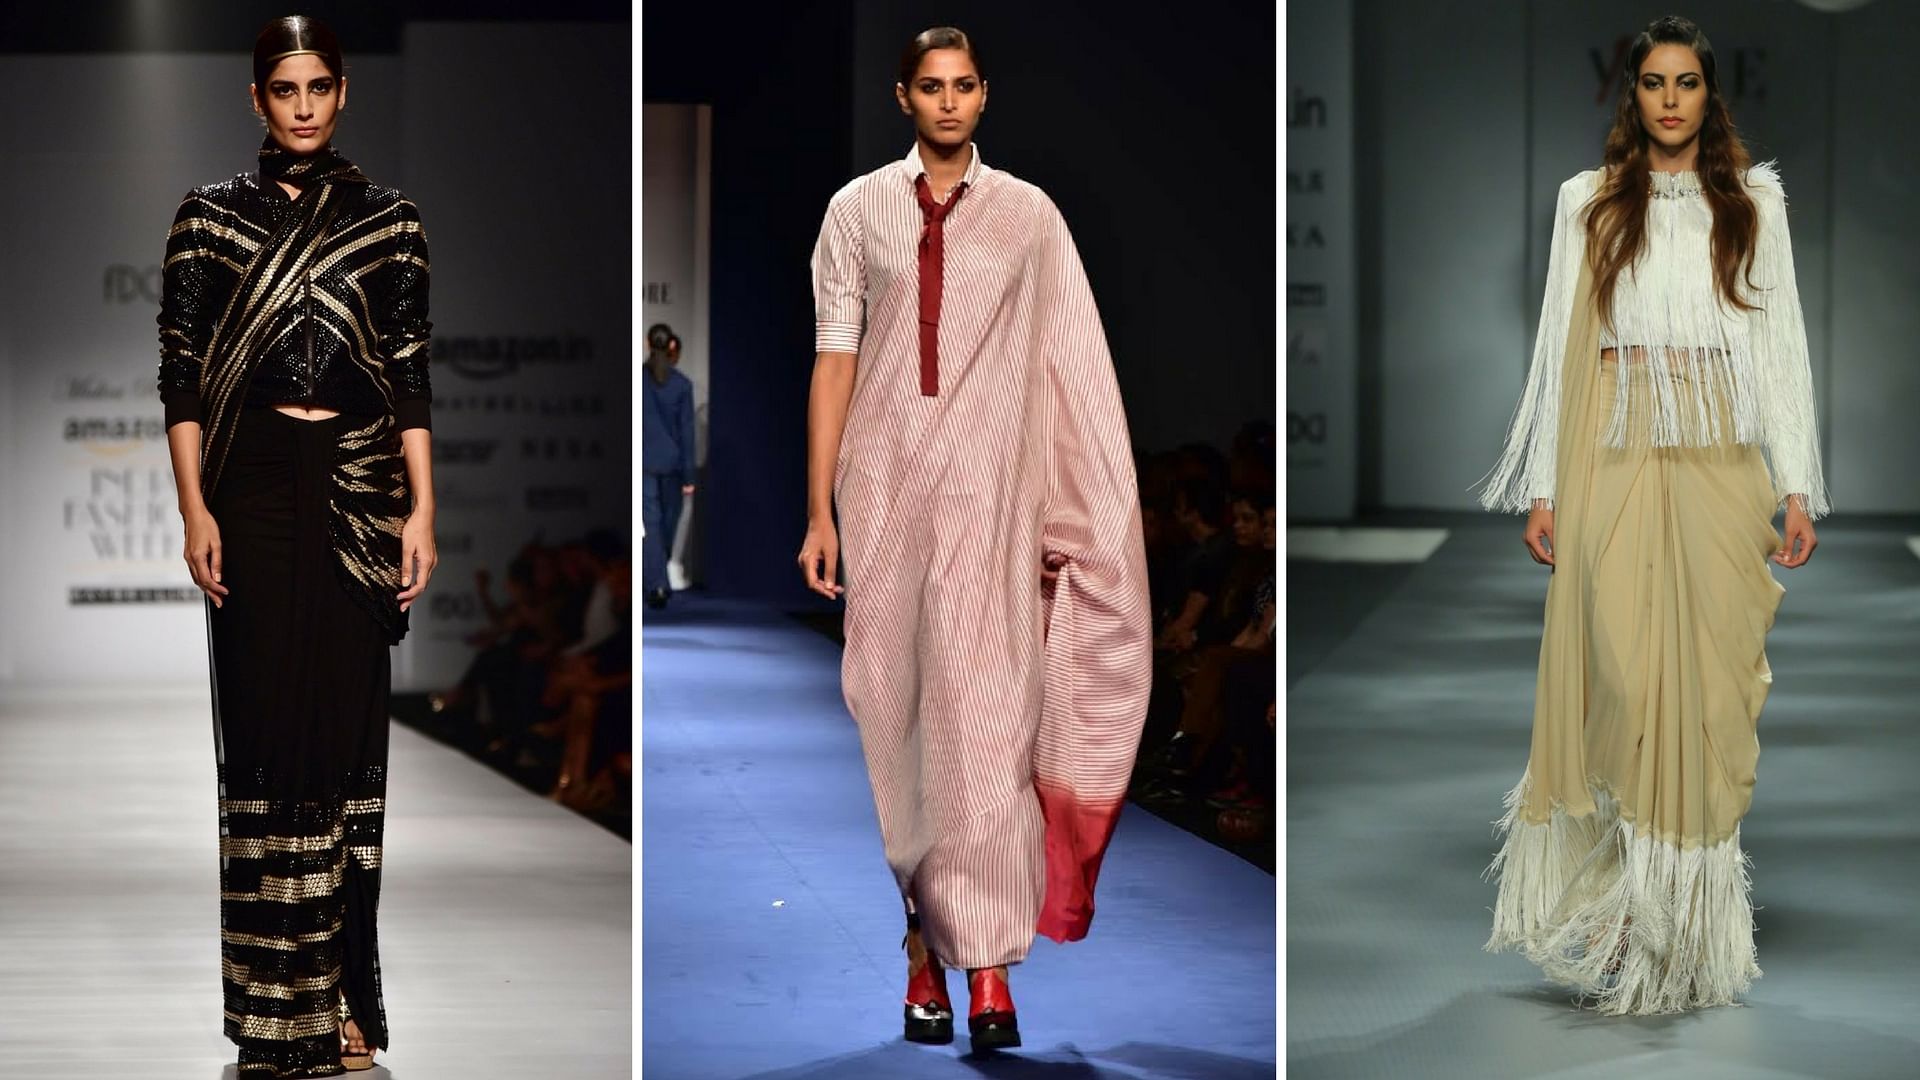 

Bomber jacket with sari, by designer Malini Ramani (L), a shirt sari with tie by designer duo Abraham and Thakore (M) and a fringe sari by designer duo Abu Jani and Sandeep Khosla (R) (Photo: Yogen Shah/FDCI)